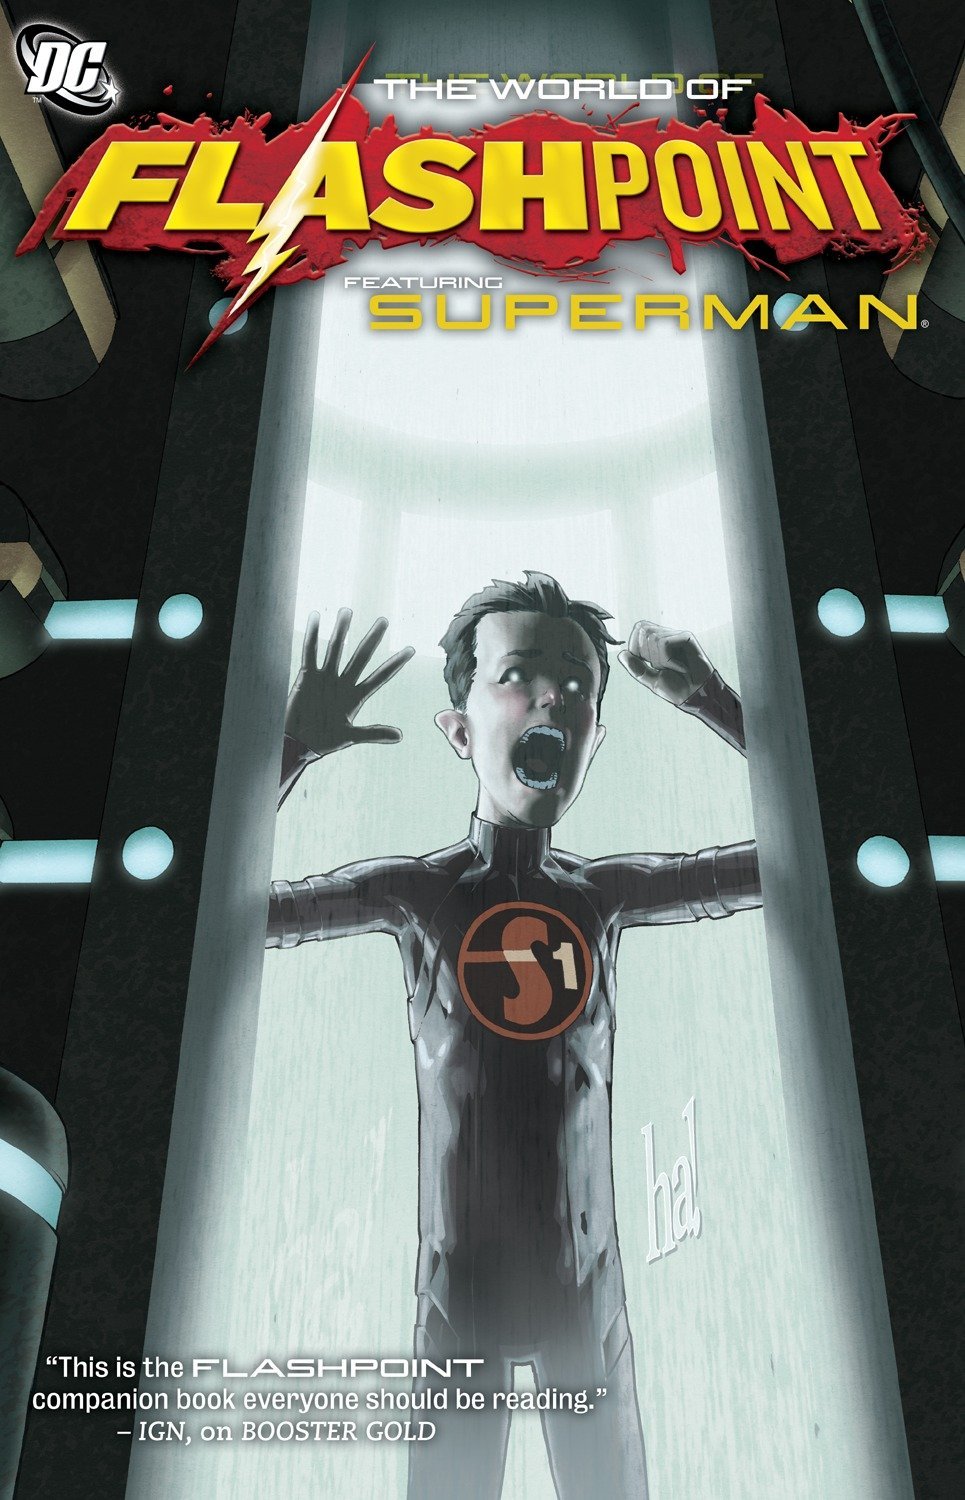 The World of Flashpoint Featuring Superman